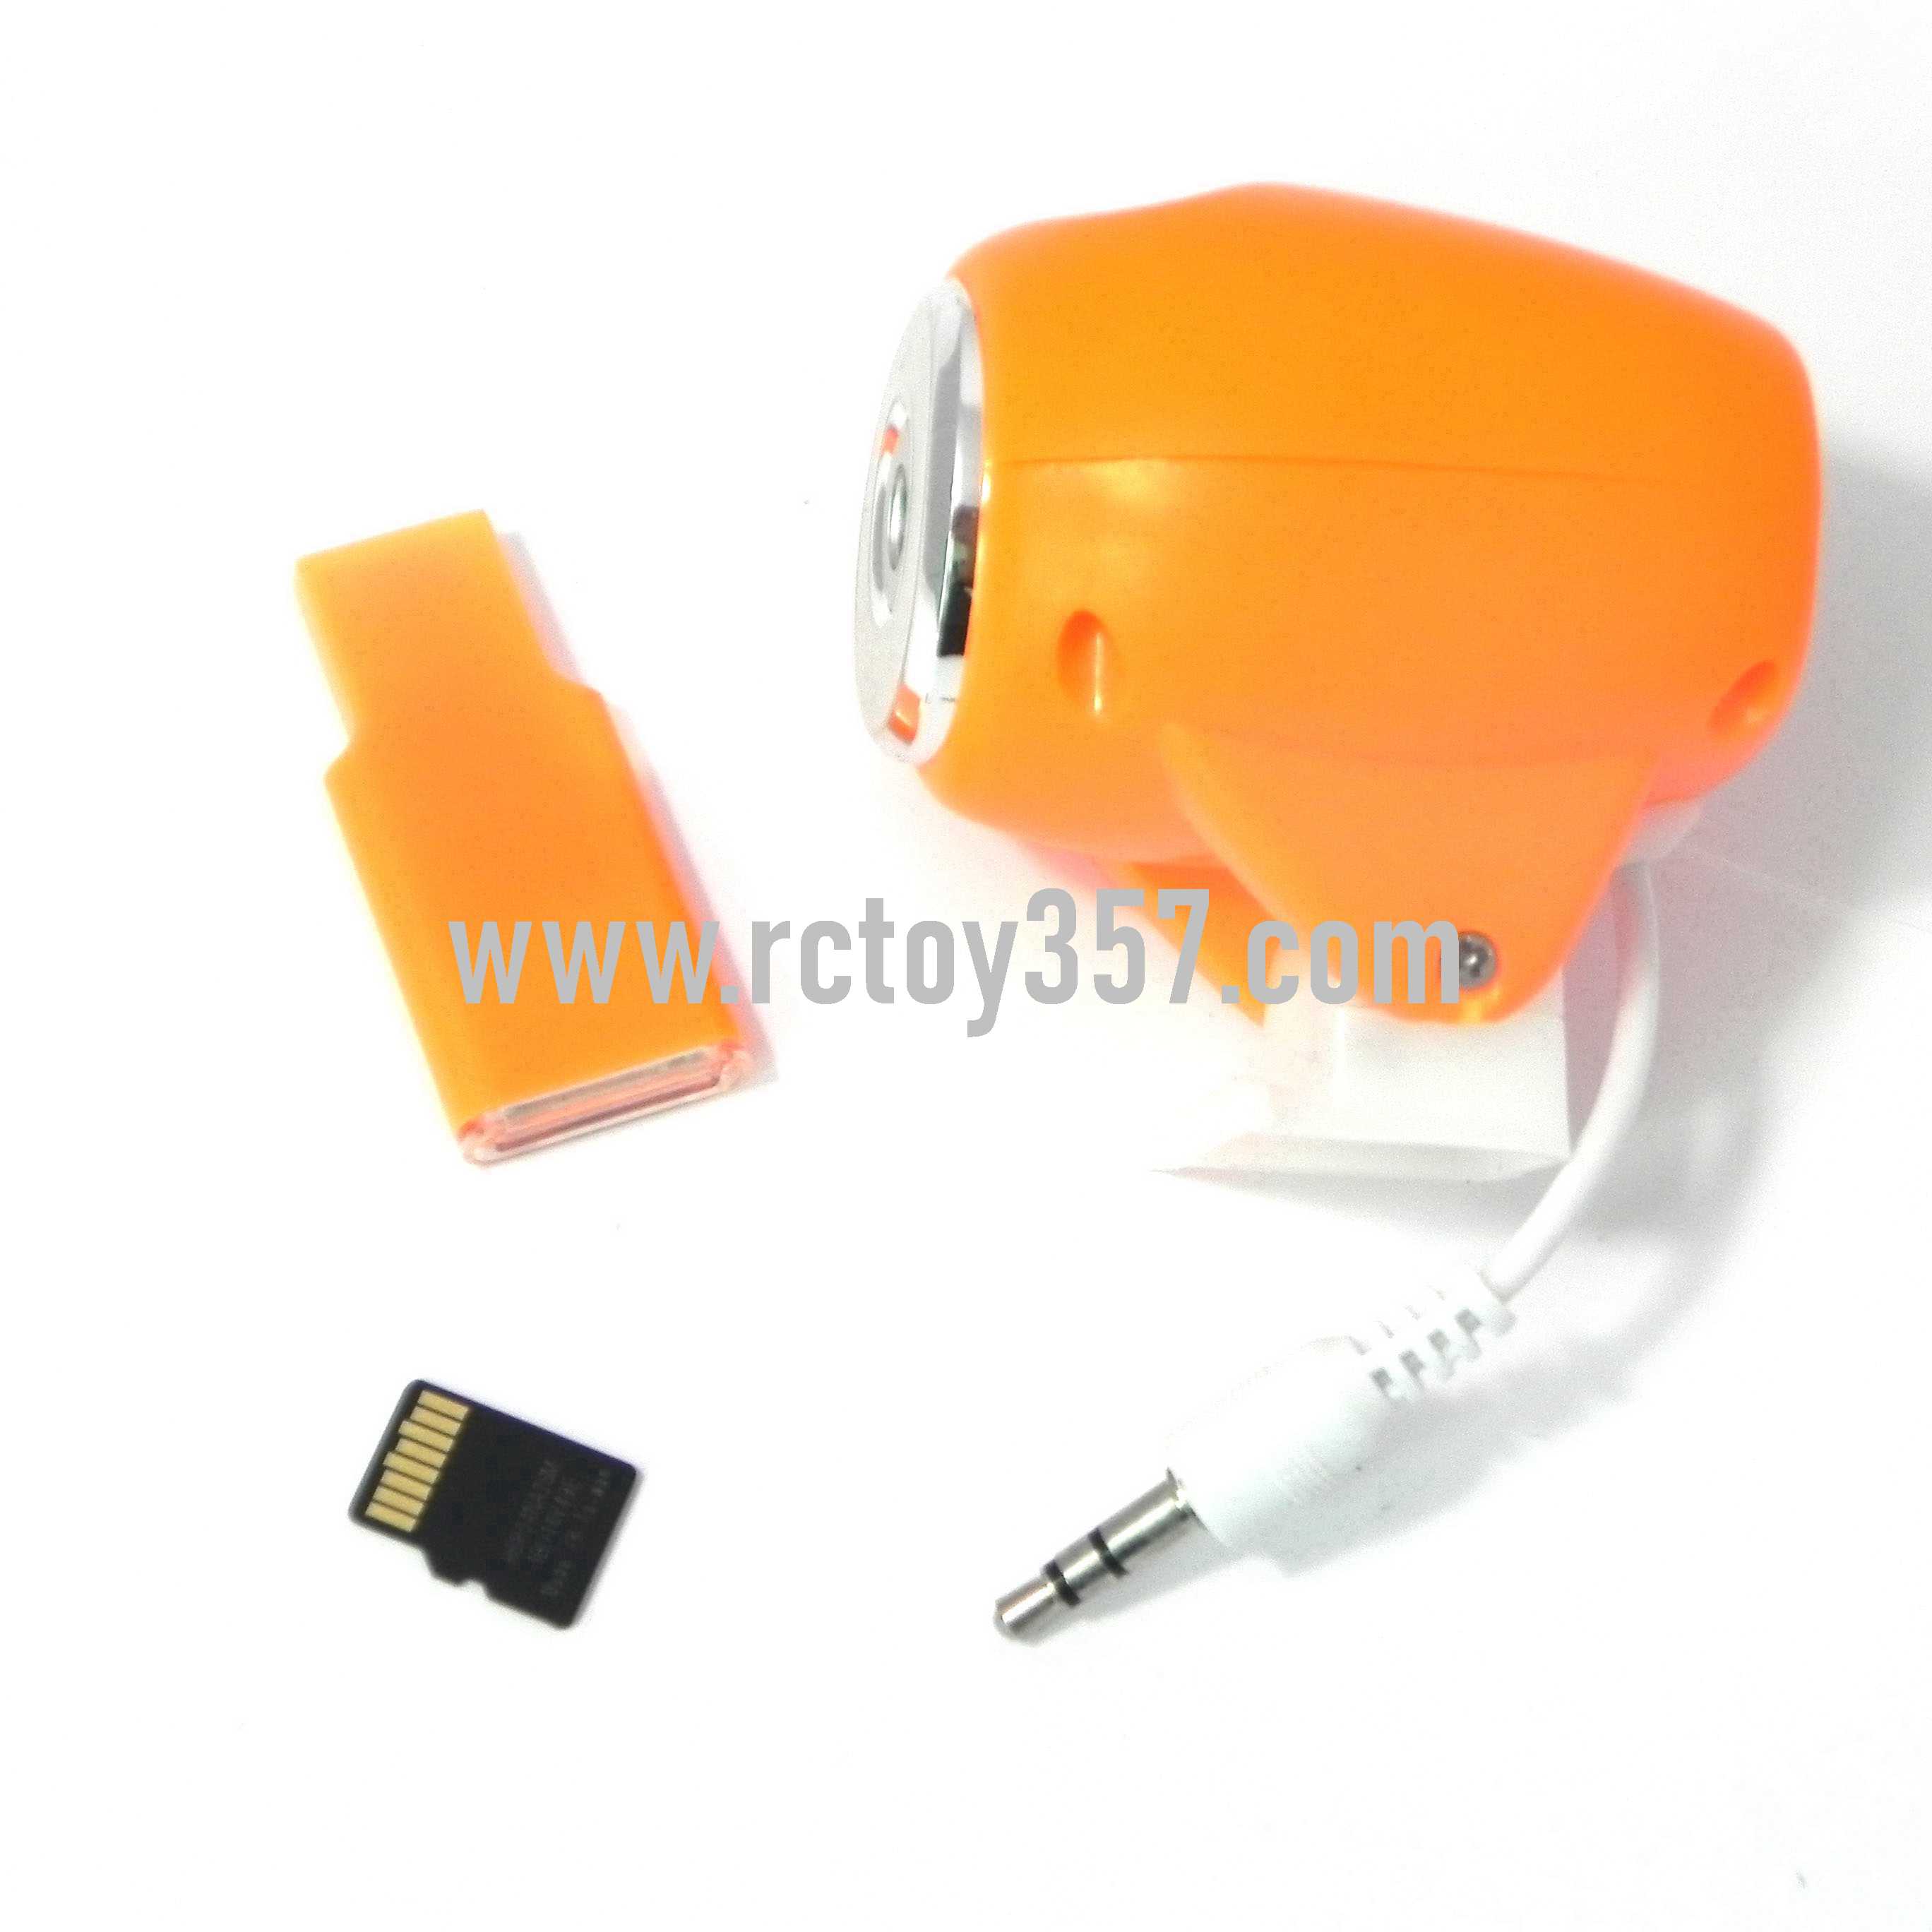 RCToy357.com - SYMA X8W Quadcopter toy Parts Real-time transmission WIFI camera